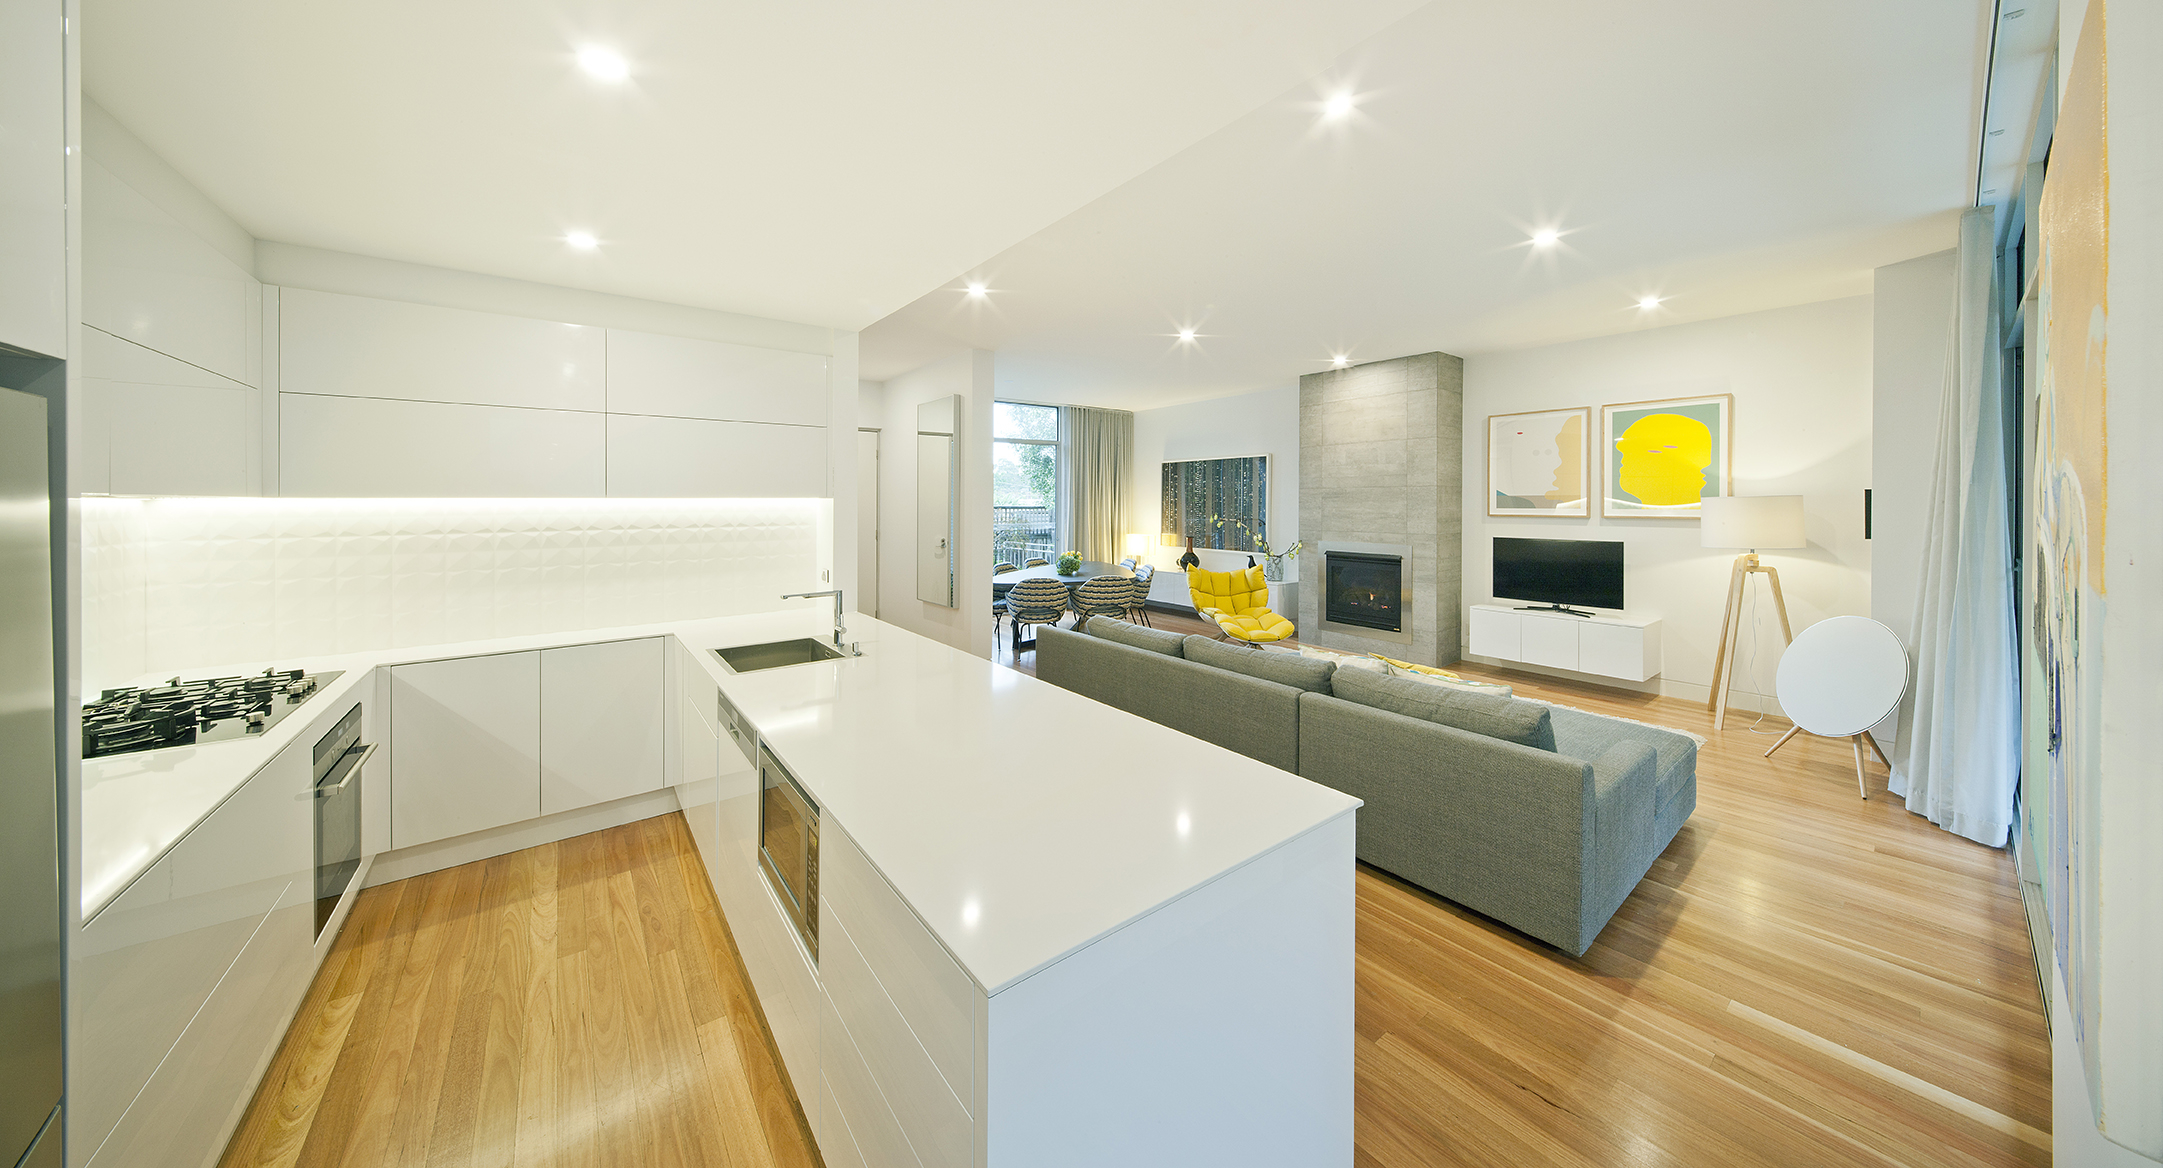 South Yarra House for MINT Kitchens